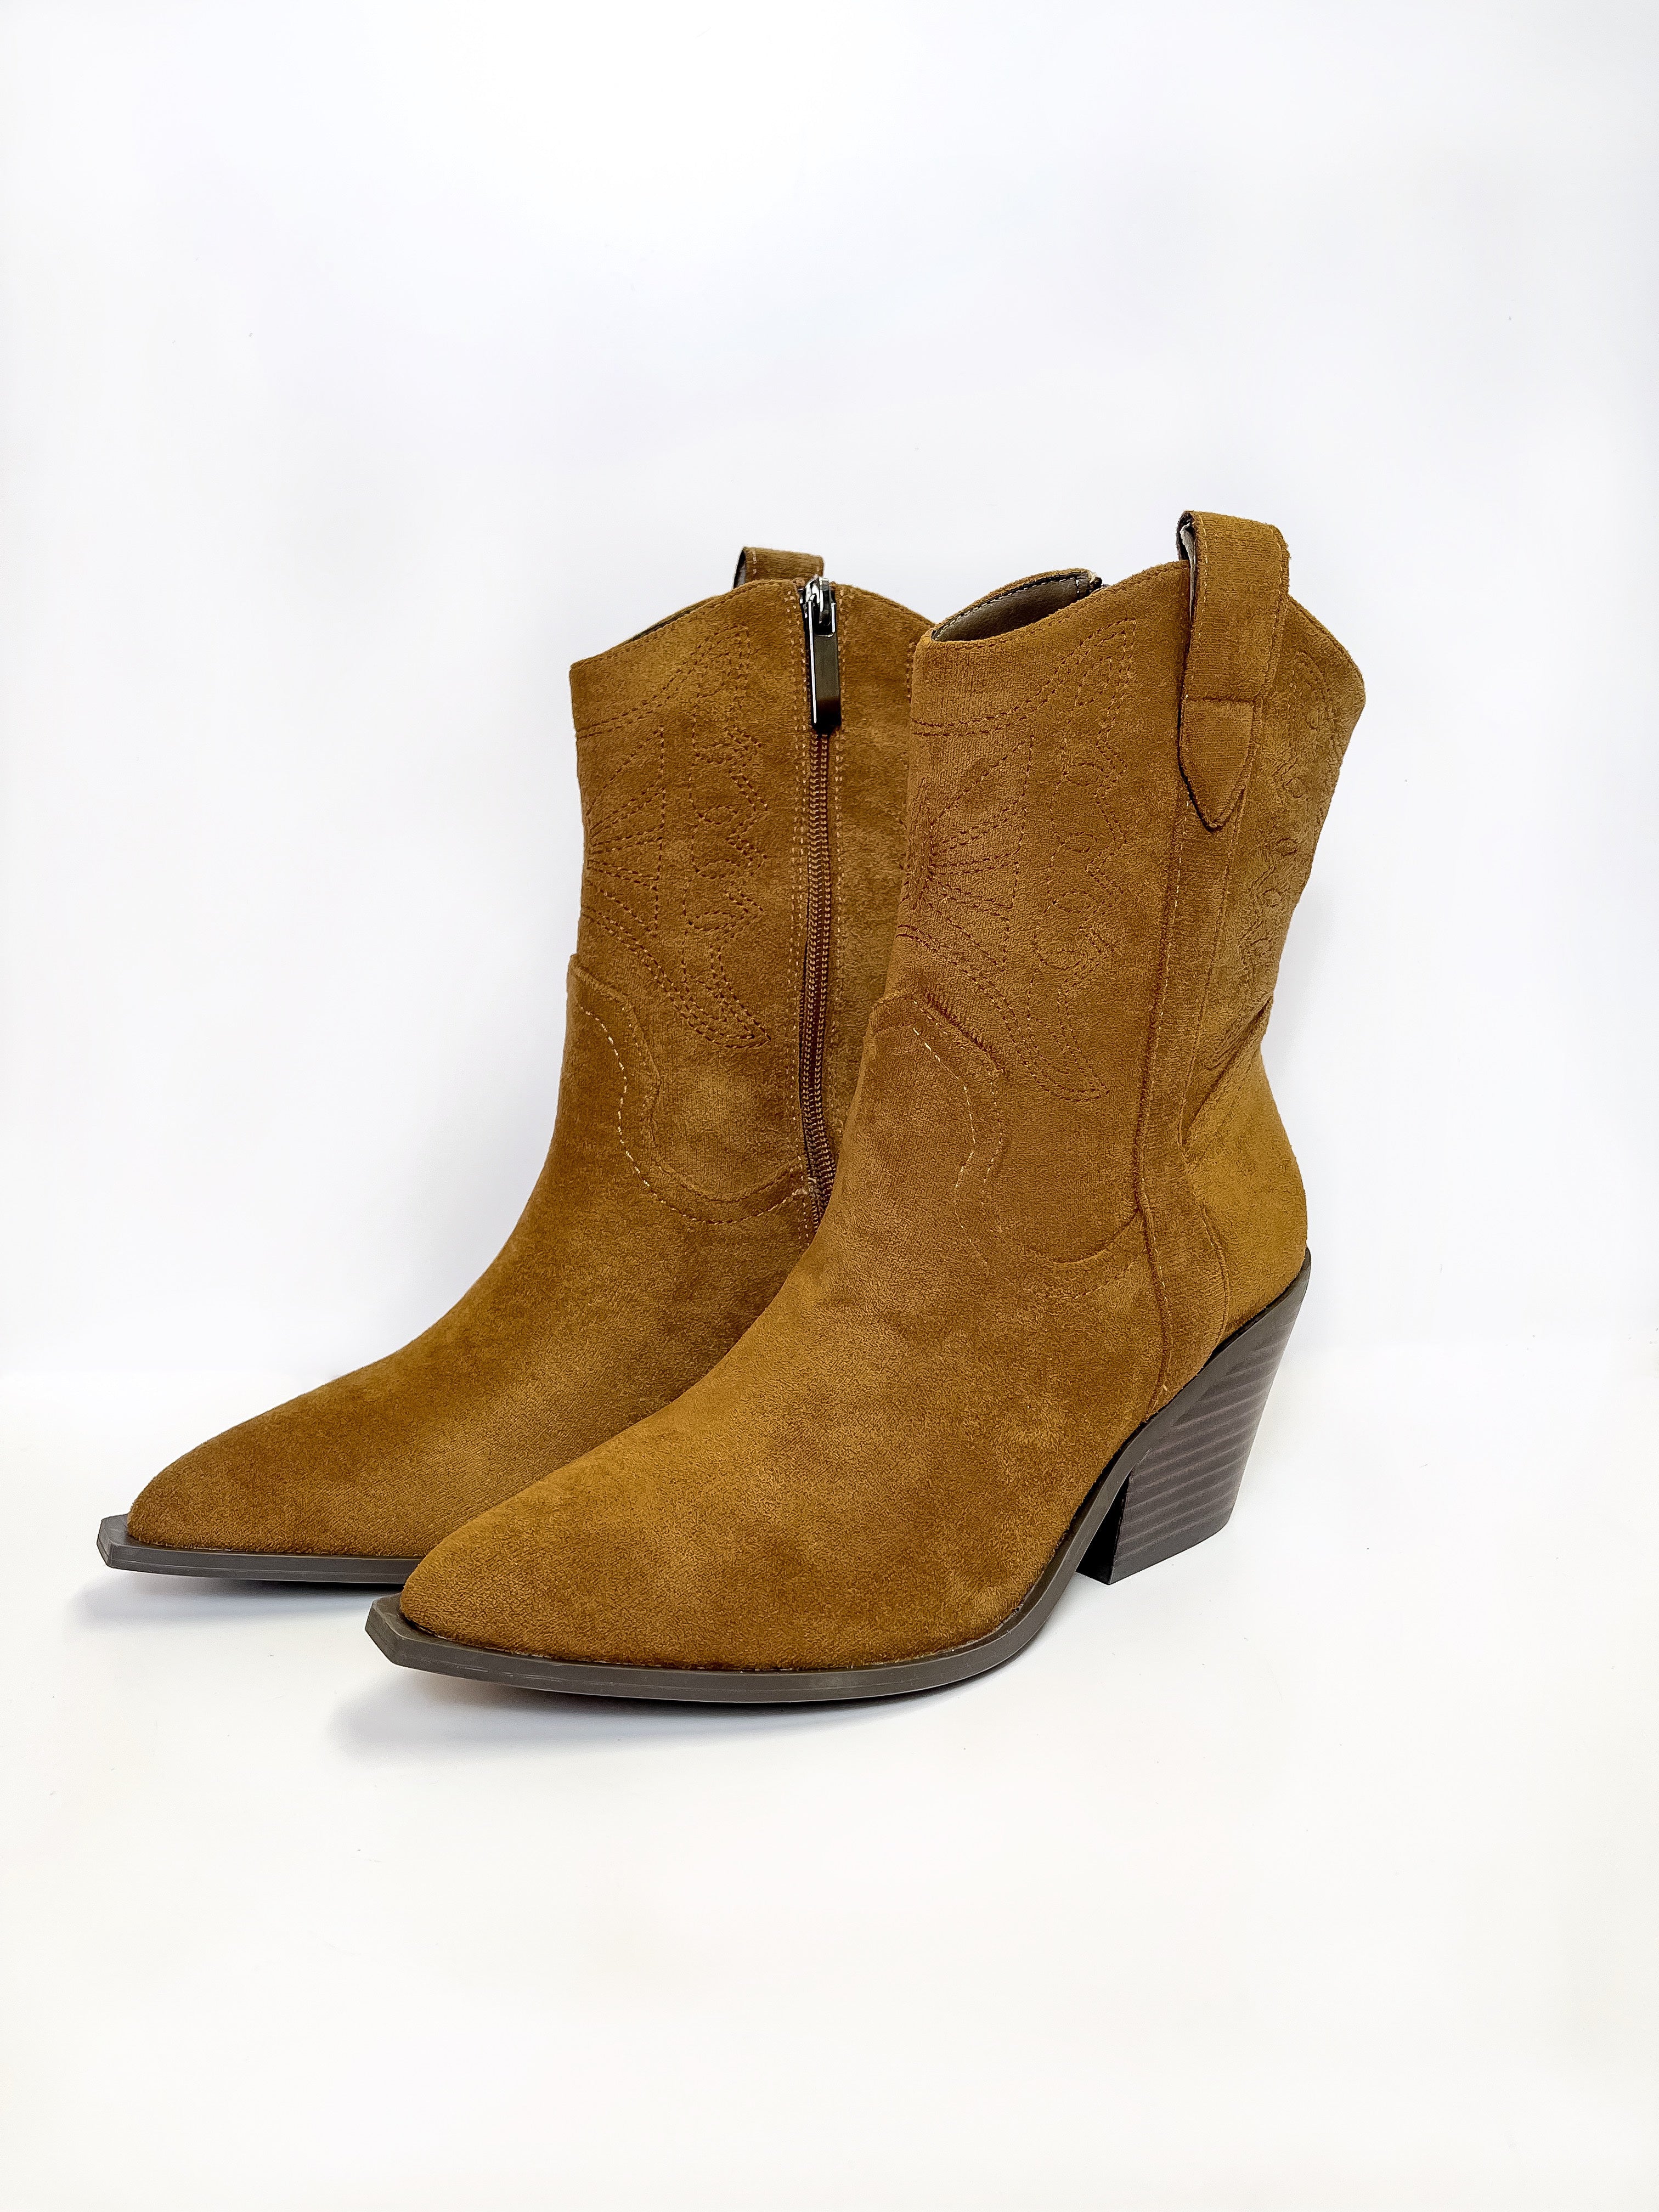 Corky's | Rowdy Western Stitch Boots in Tobacco Suede - Giddy Up Glamour Boutique